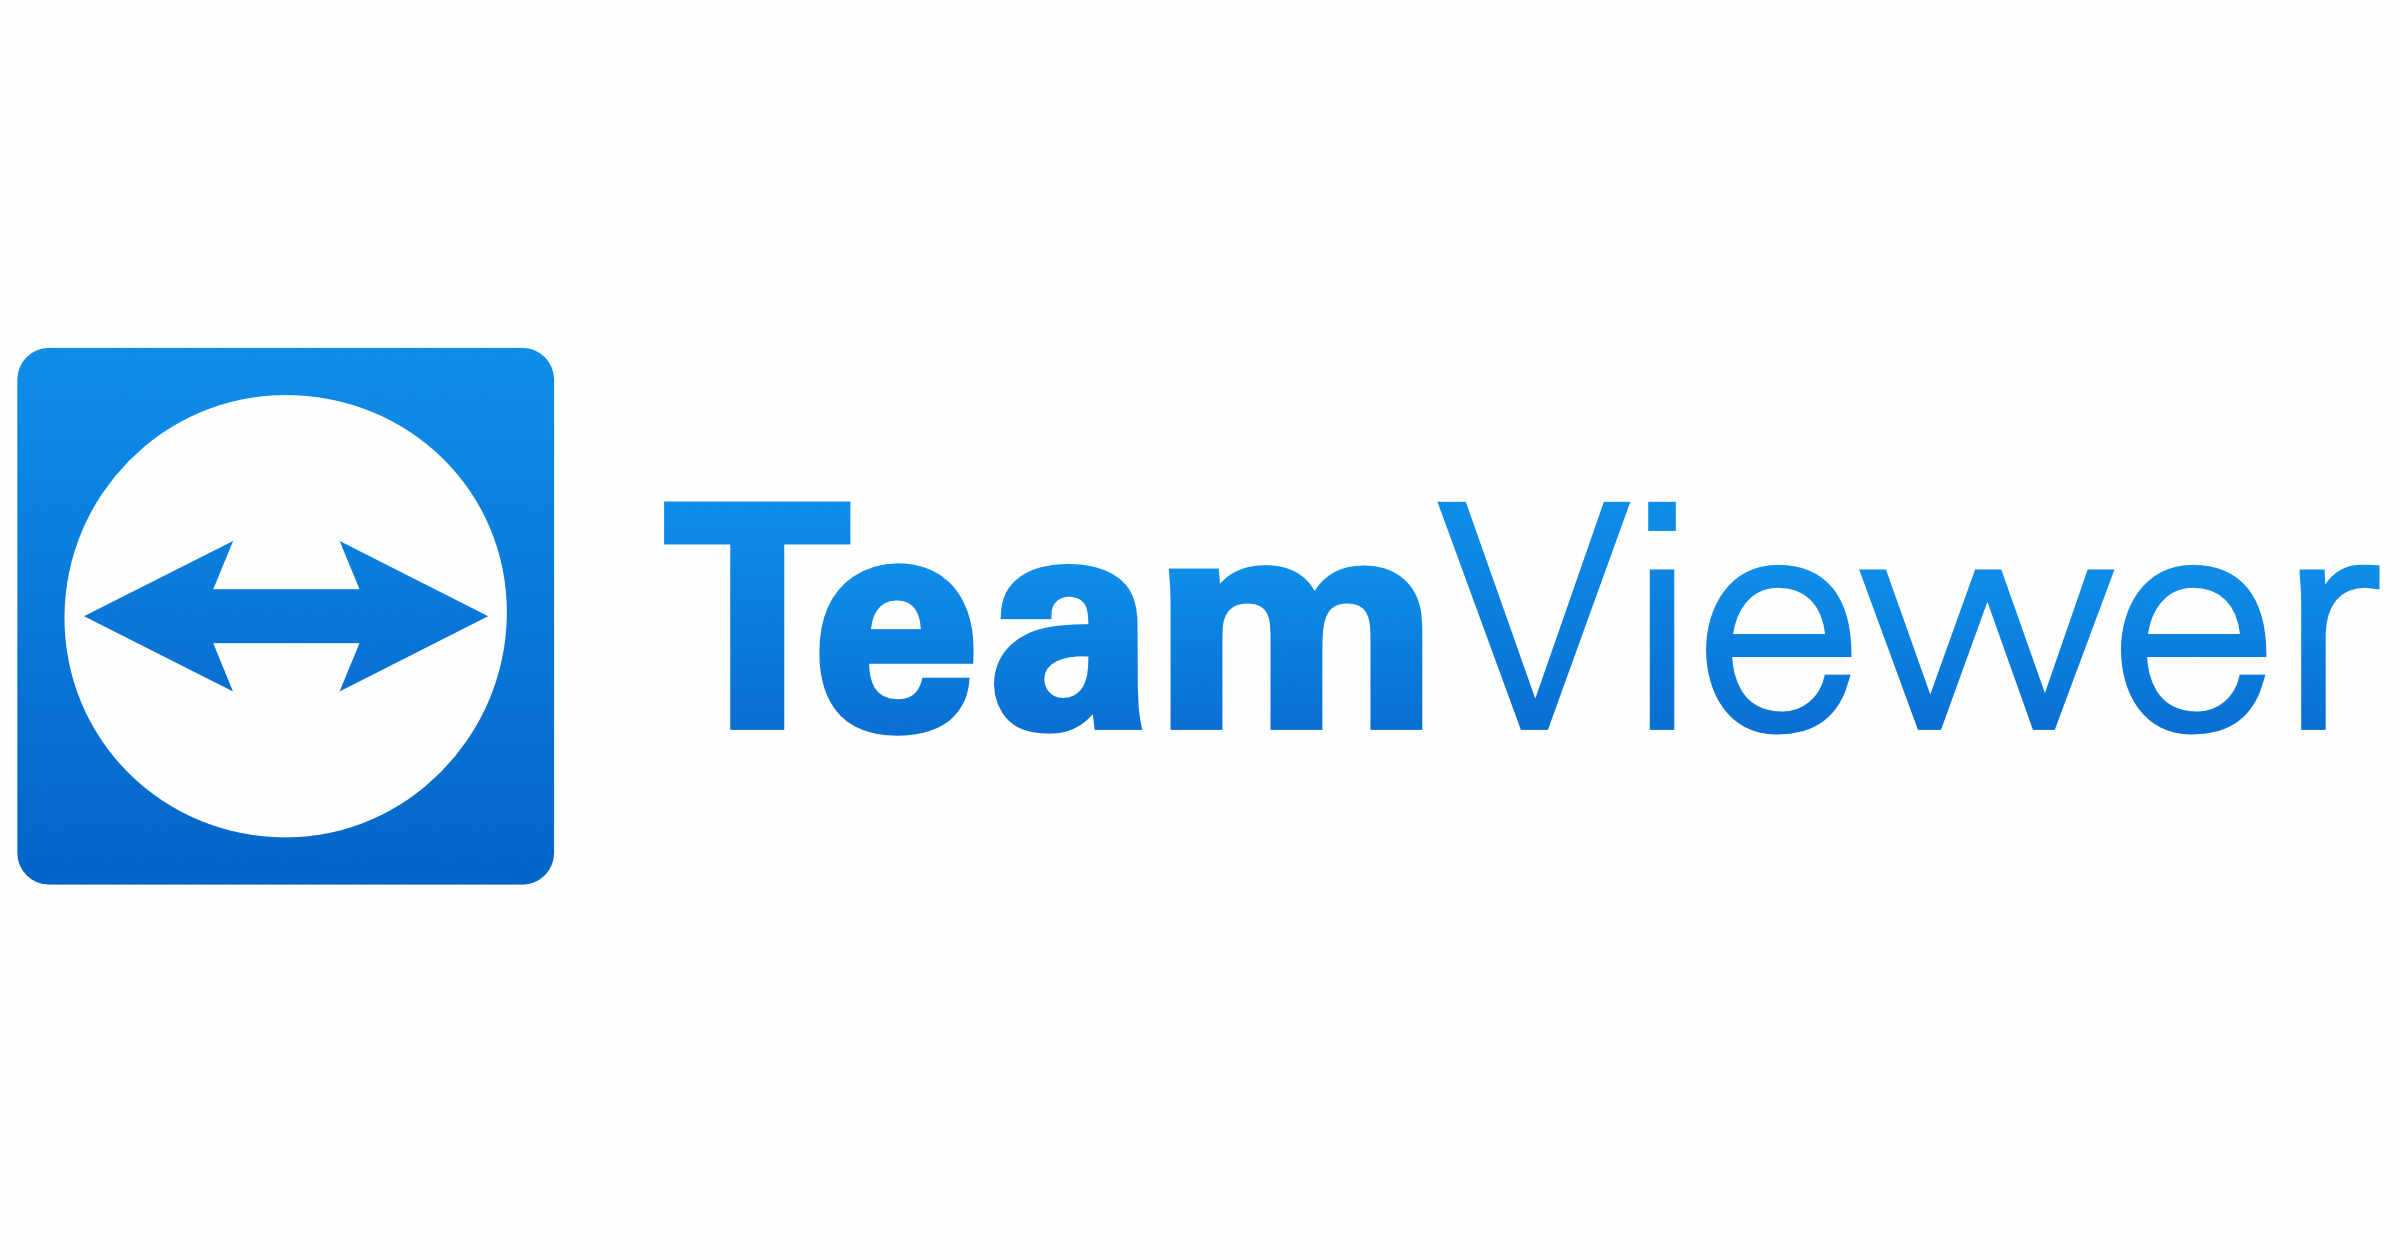 [PL] Remote Assistance w Intune + TeamViewer